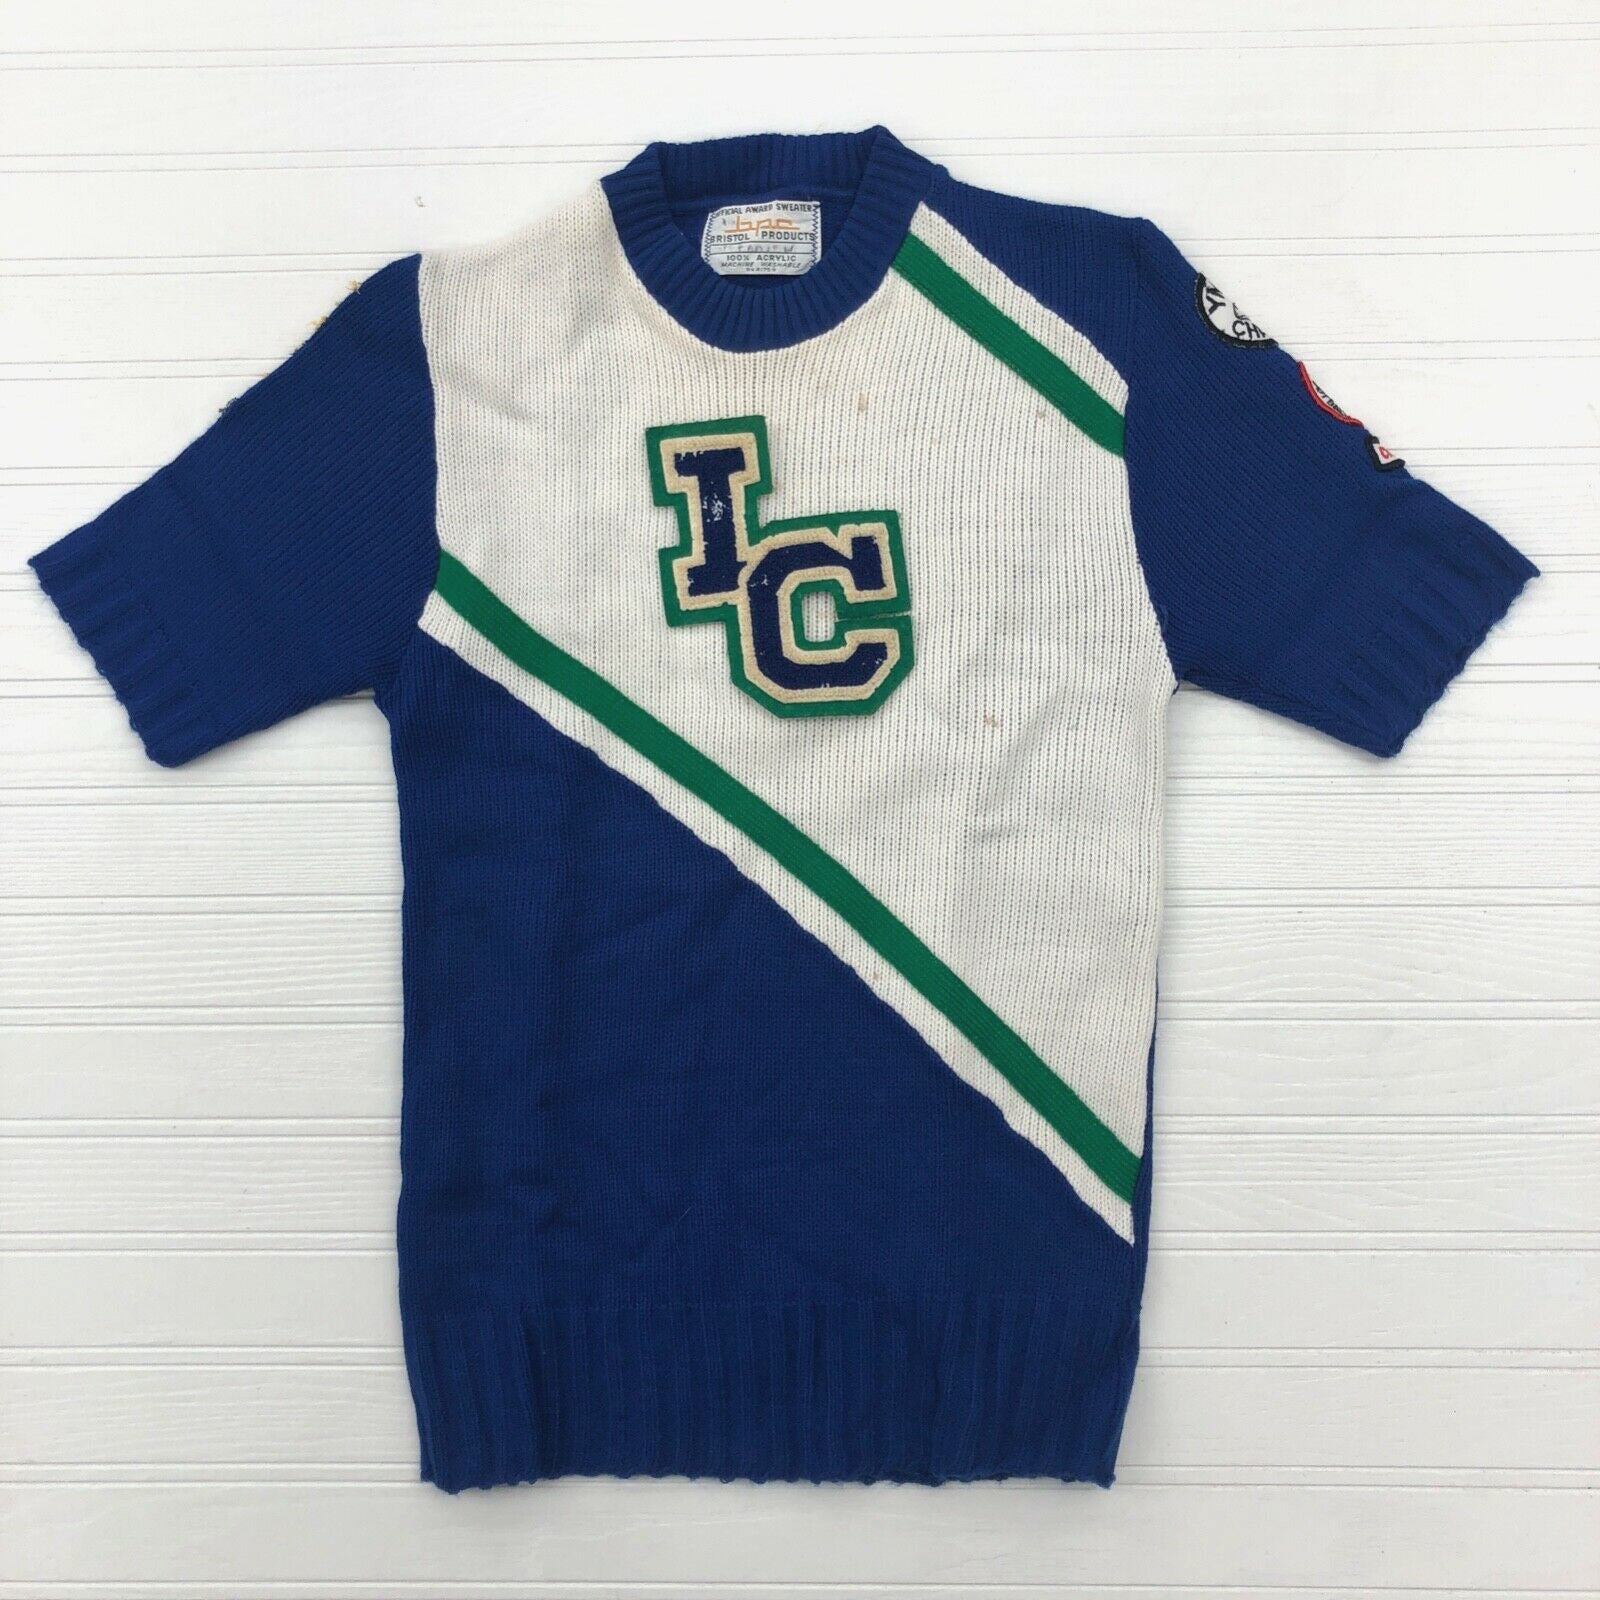 Rare Vintage Bristol Products Blue 'LC' YMCA Cheerleader Sweater Youth Size S/M